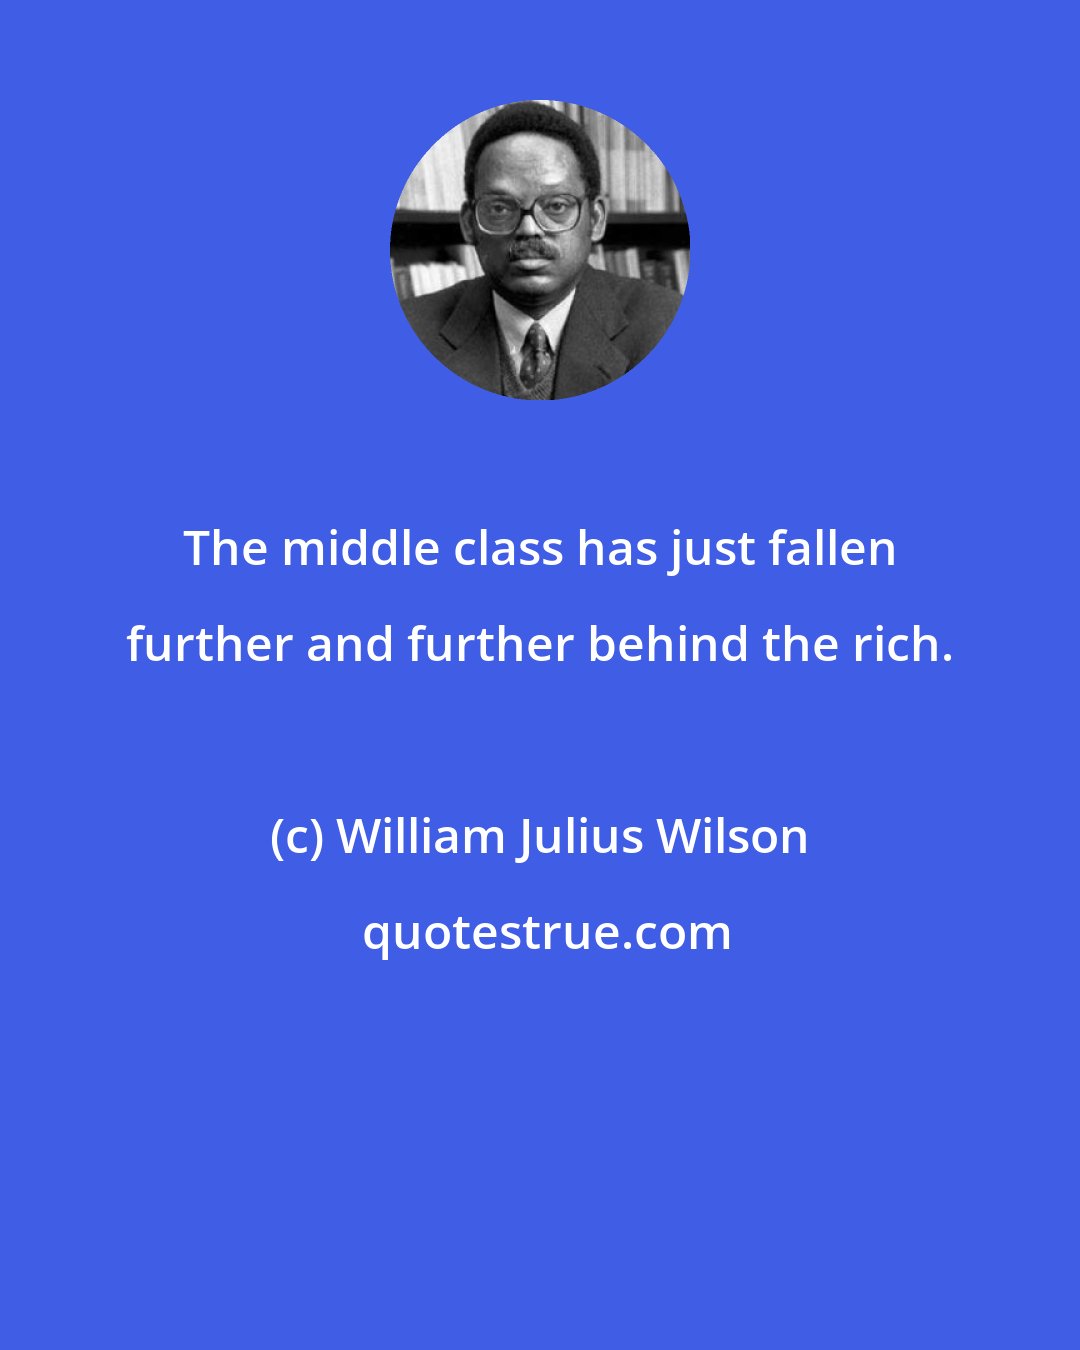 William Julius Wilson: The middle class has just fallen further and further behind the rich.